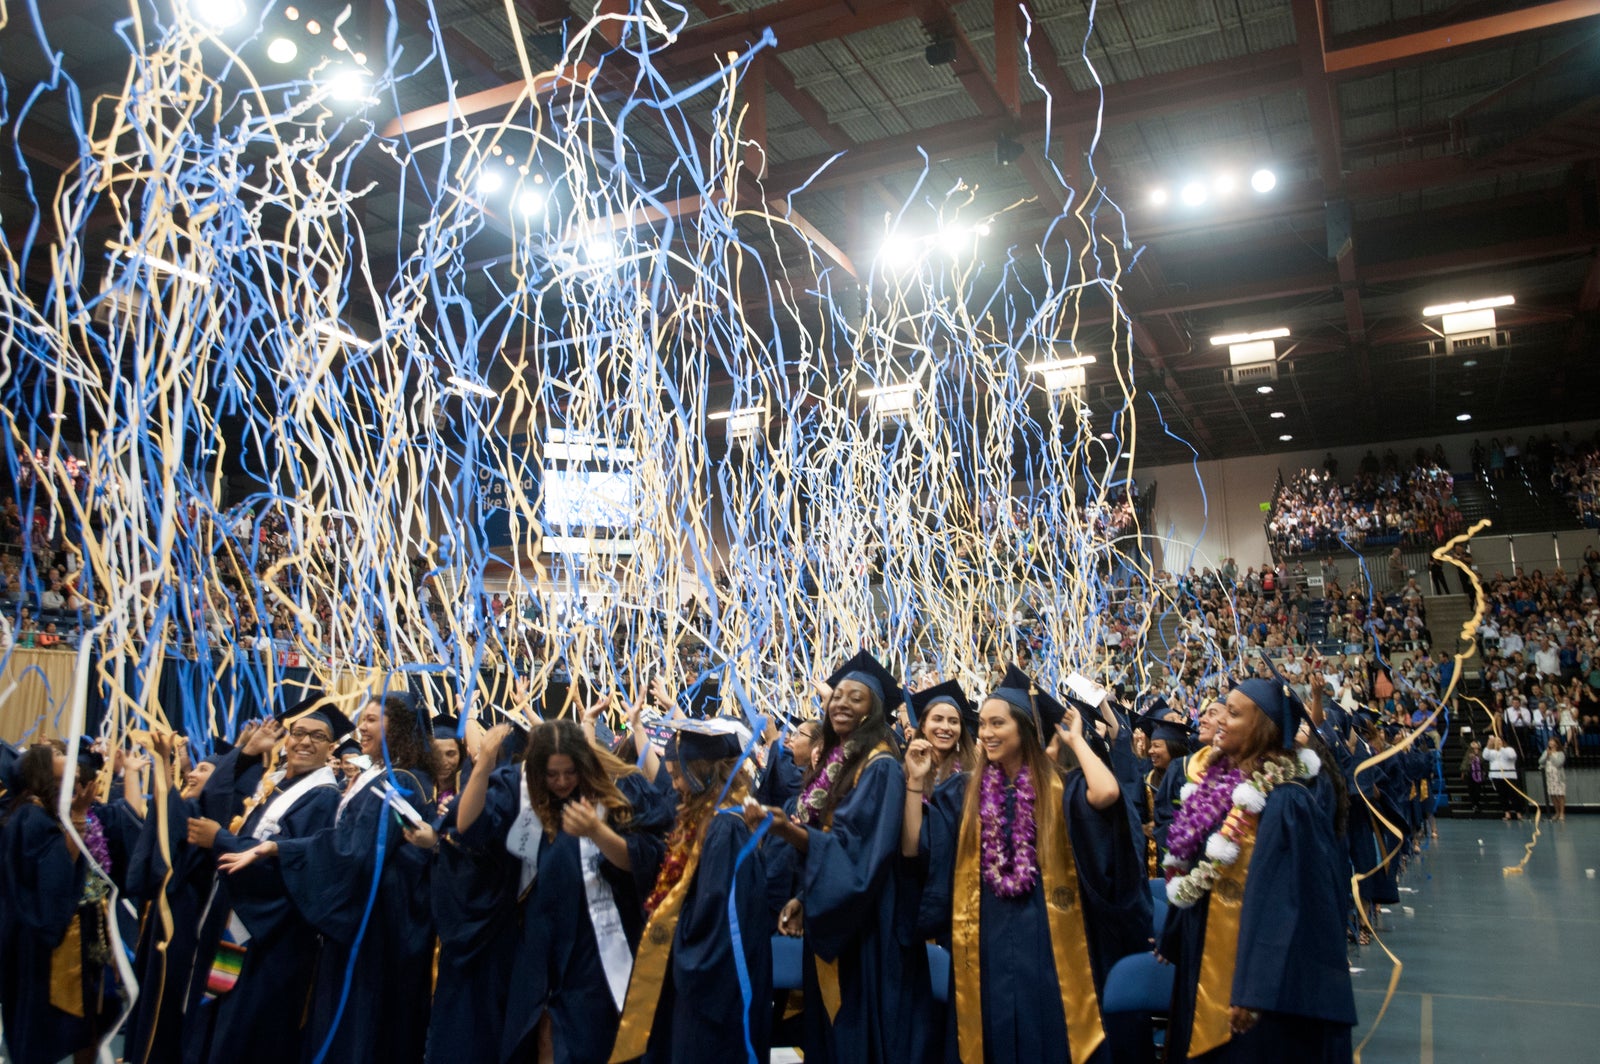 Streamers fall during a UC Davis commencement ceremony.